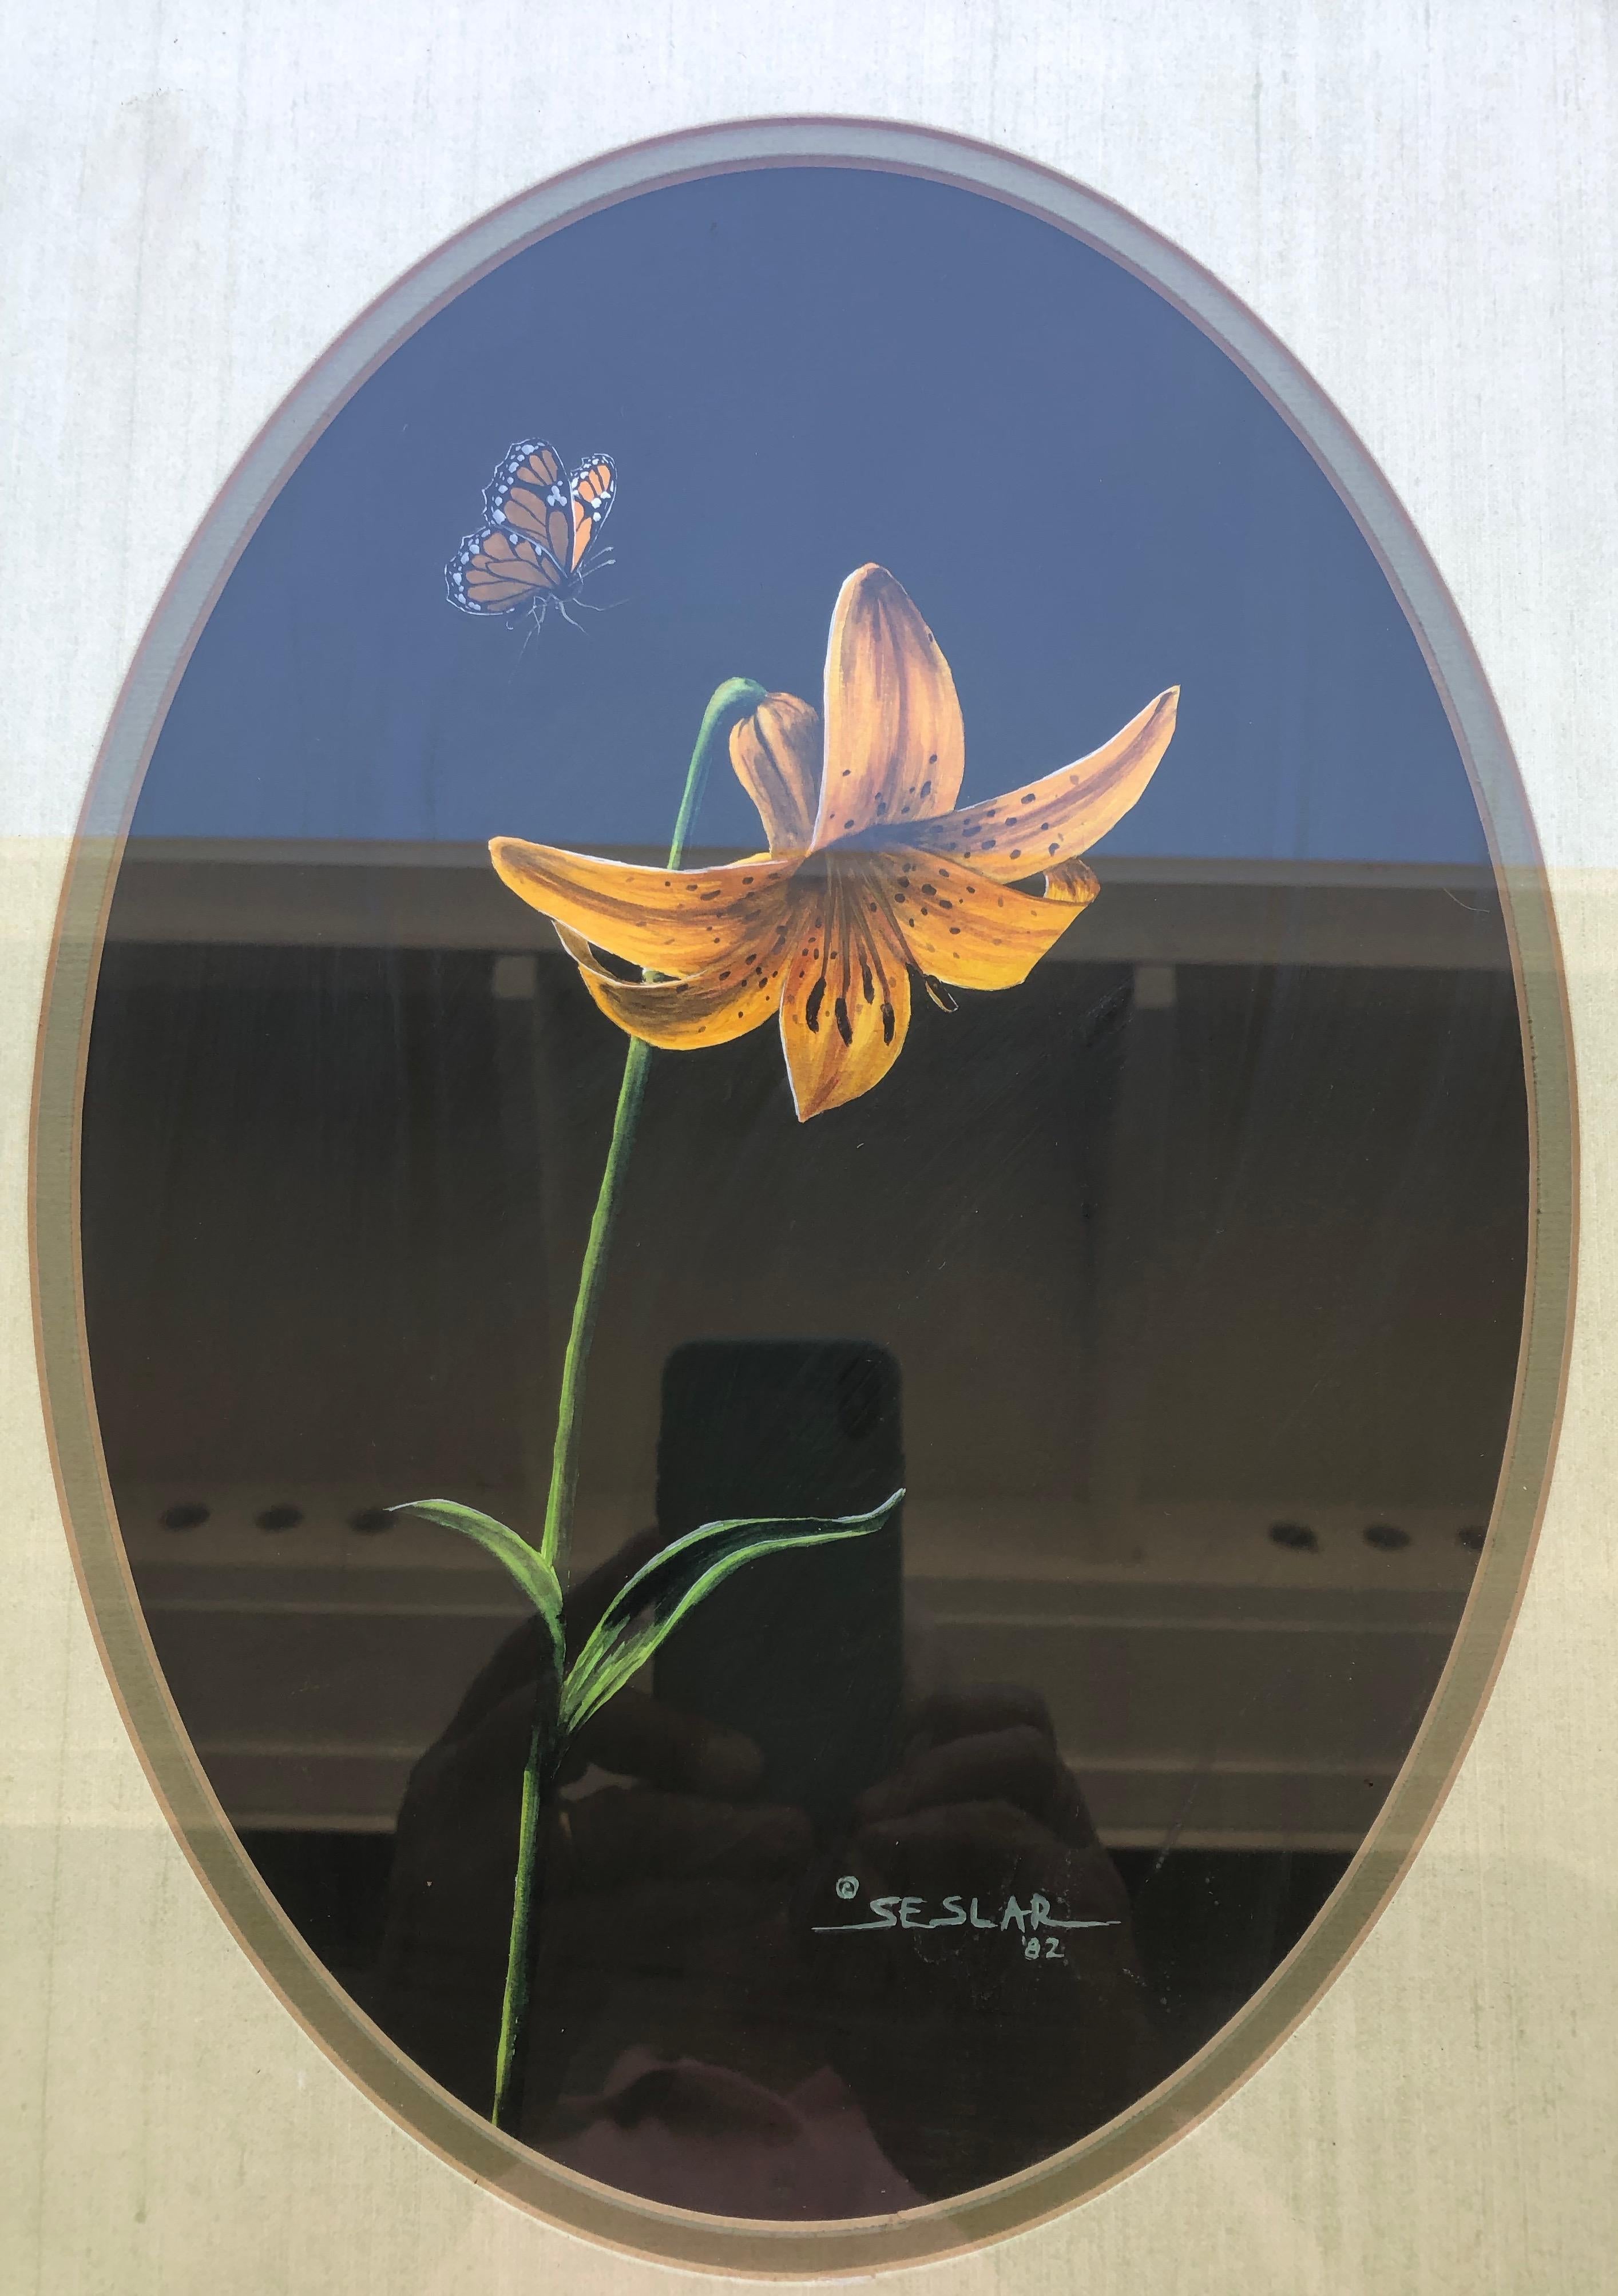 American Signed Painting by P. Seslar, Entitled the Butterfly and Lily, in Gold Frame For Sale